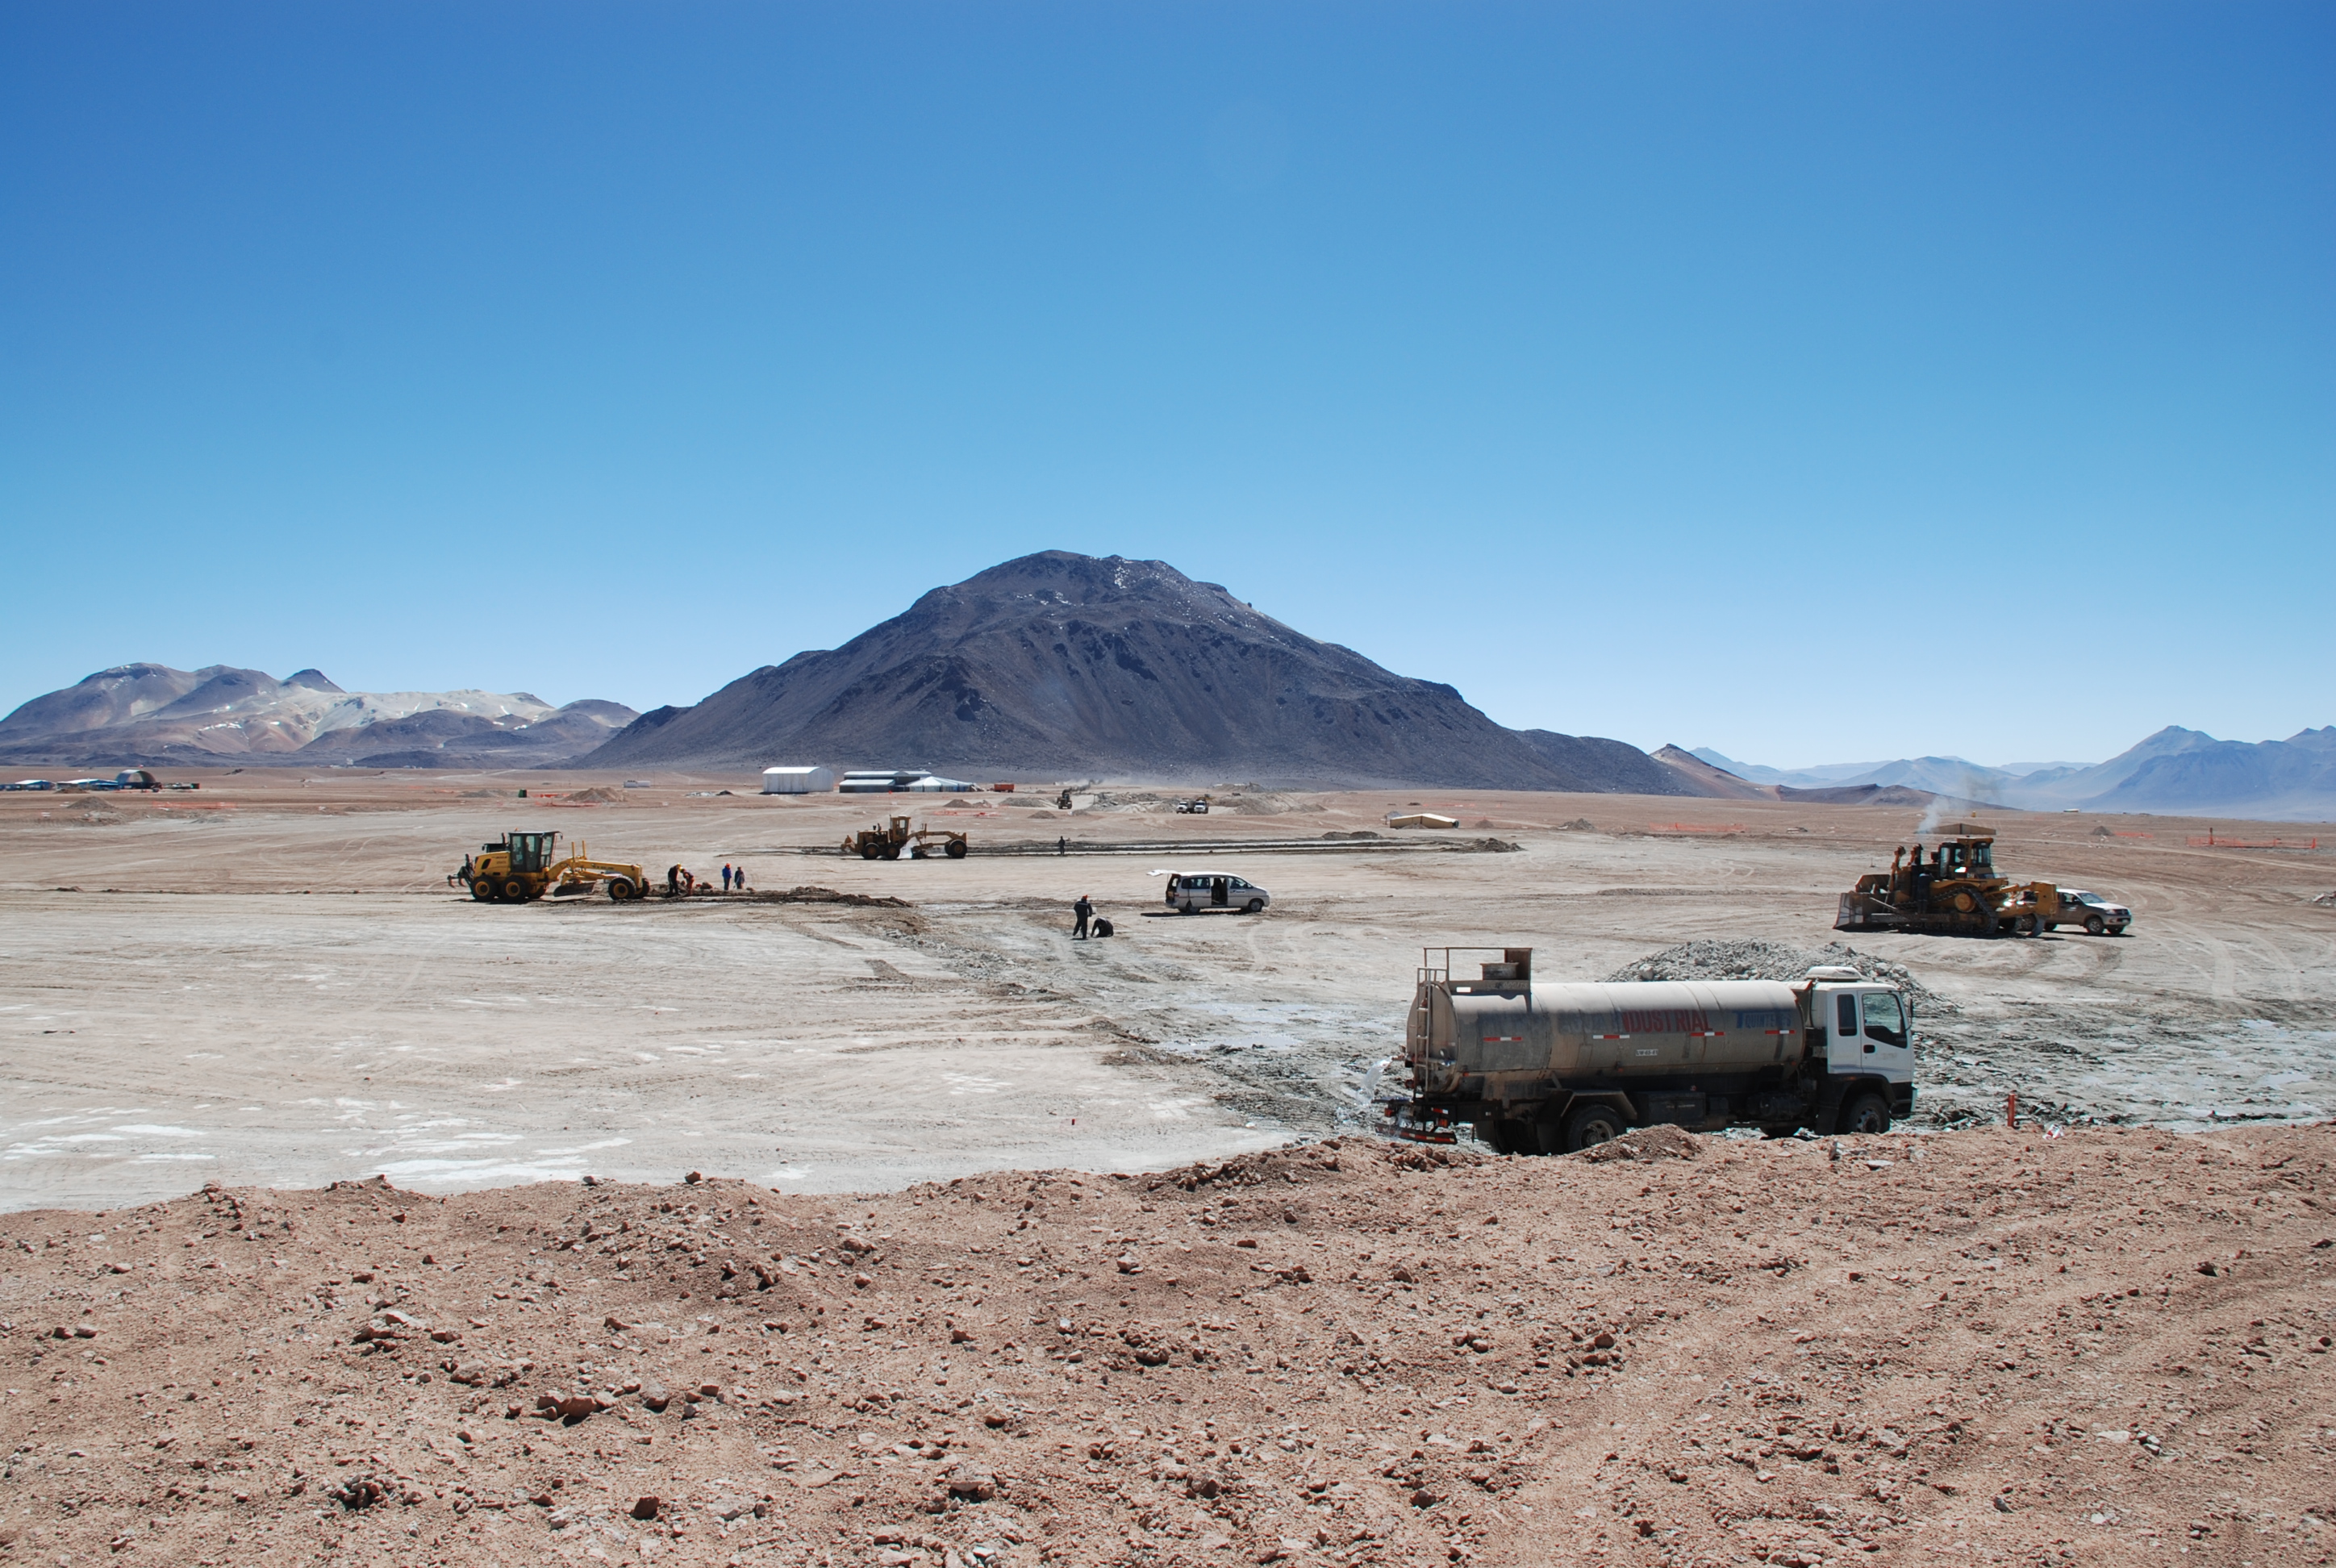 The Chajnantor Site of the ALMA Central Cluster (looking roughly North, with the AOS TB in the background) in August 2008